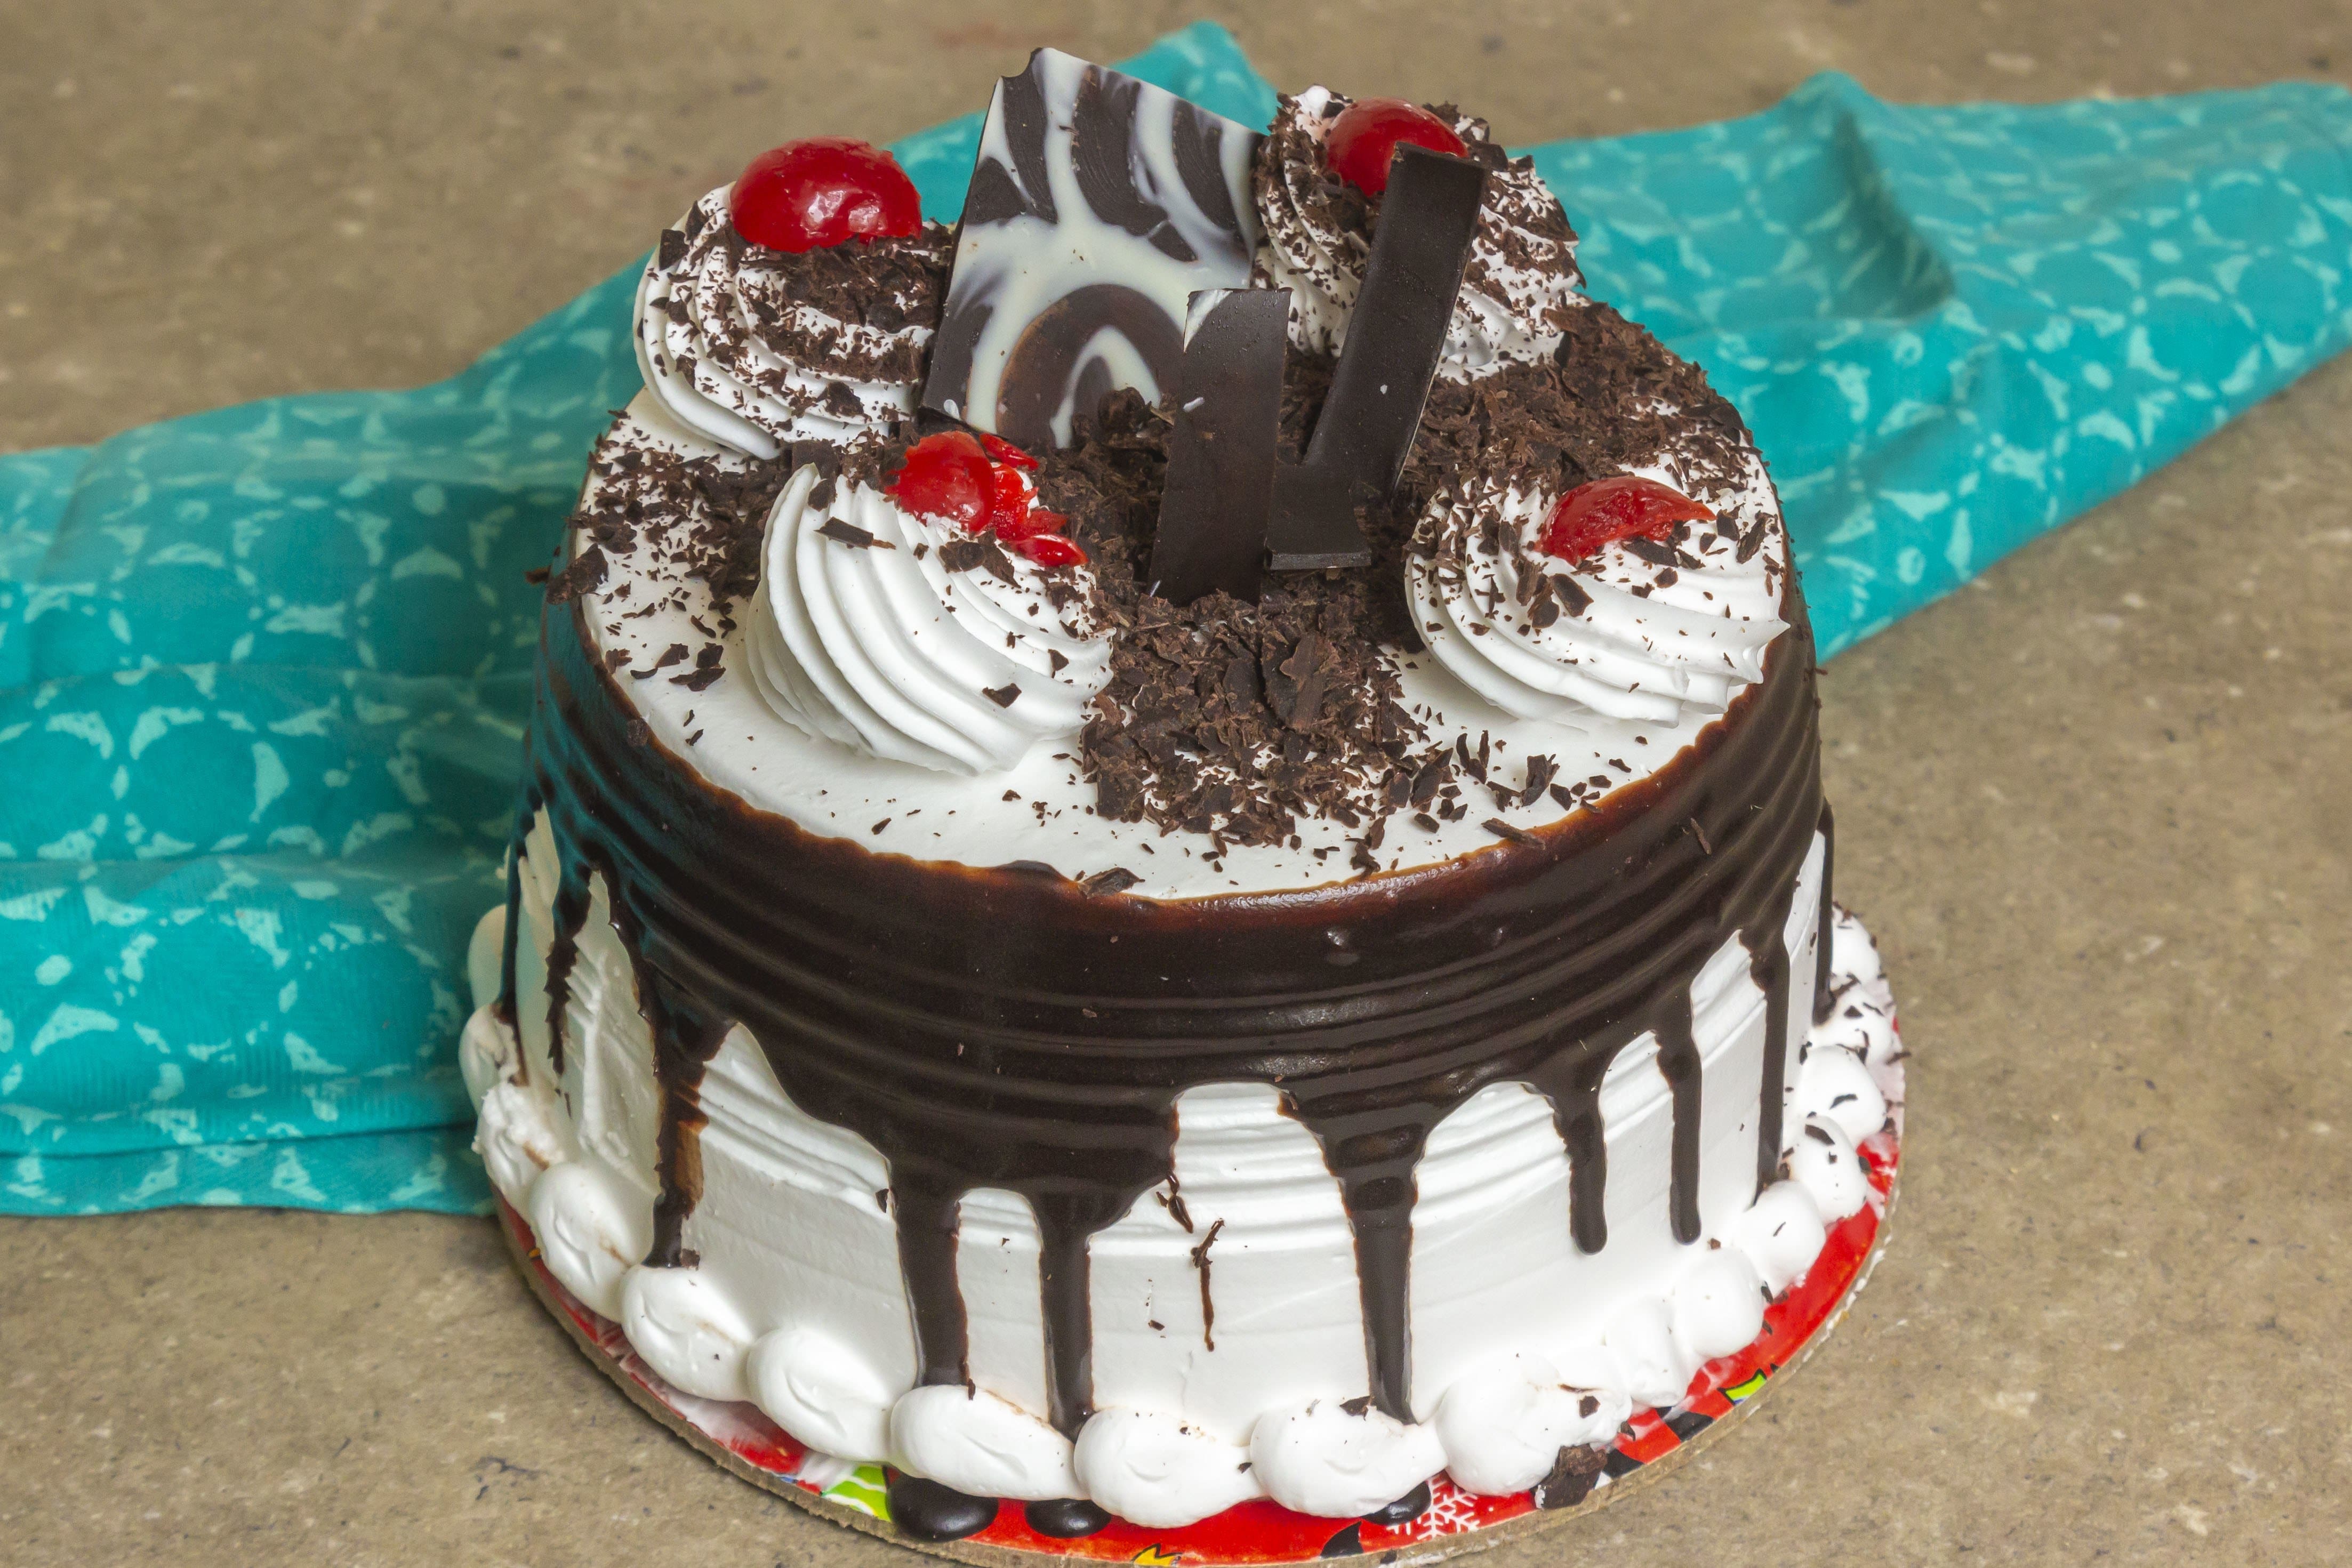 The Cake Time, Bhayandar order online - Zomato